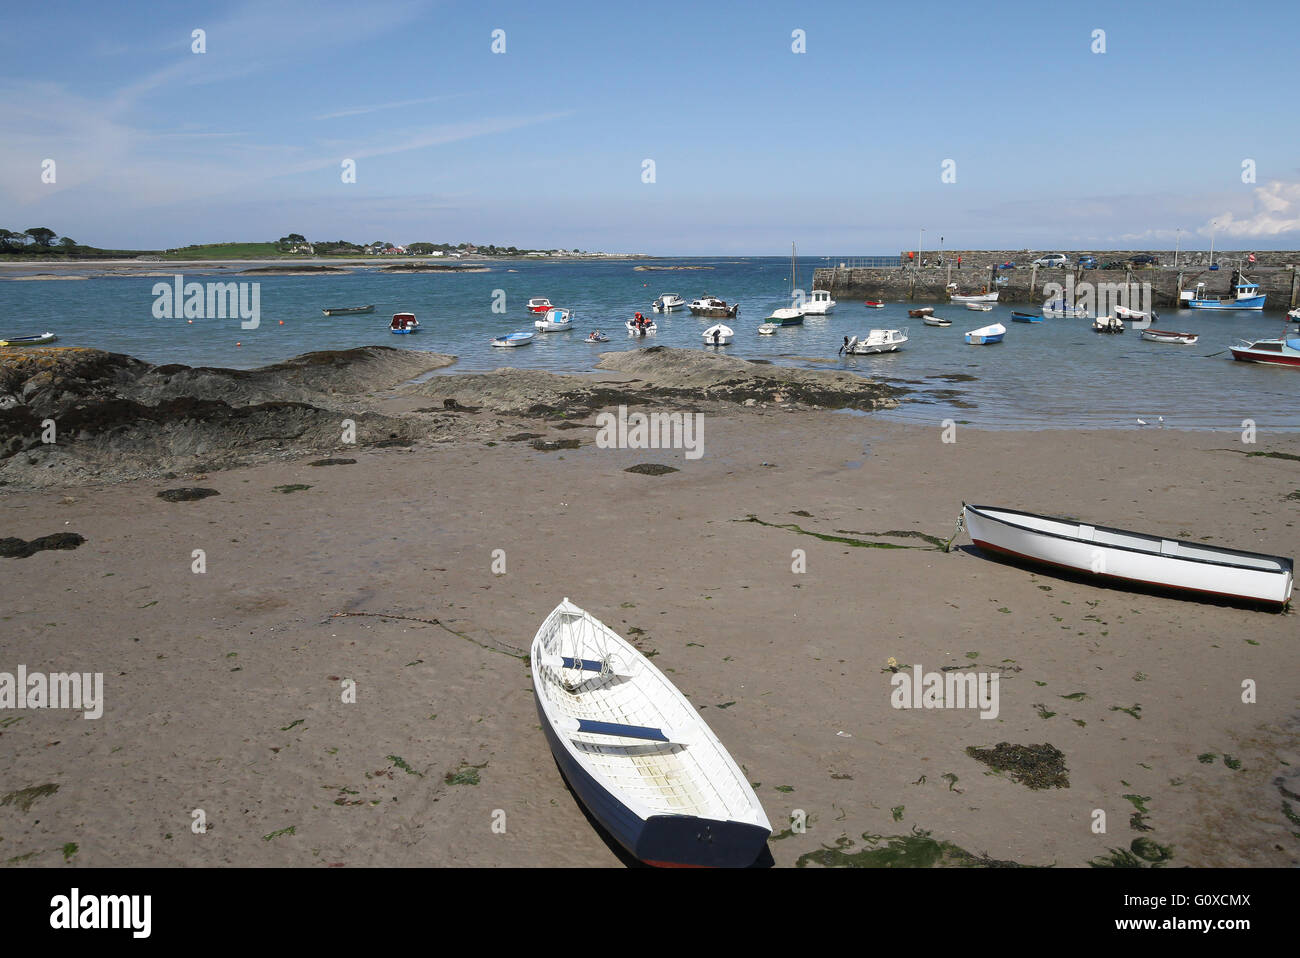 Boats on the sand at low tide in the small coastal harbour at Ballywalter, County Down, Northern Ireland Stock Photo